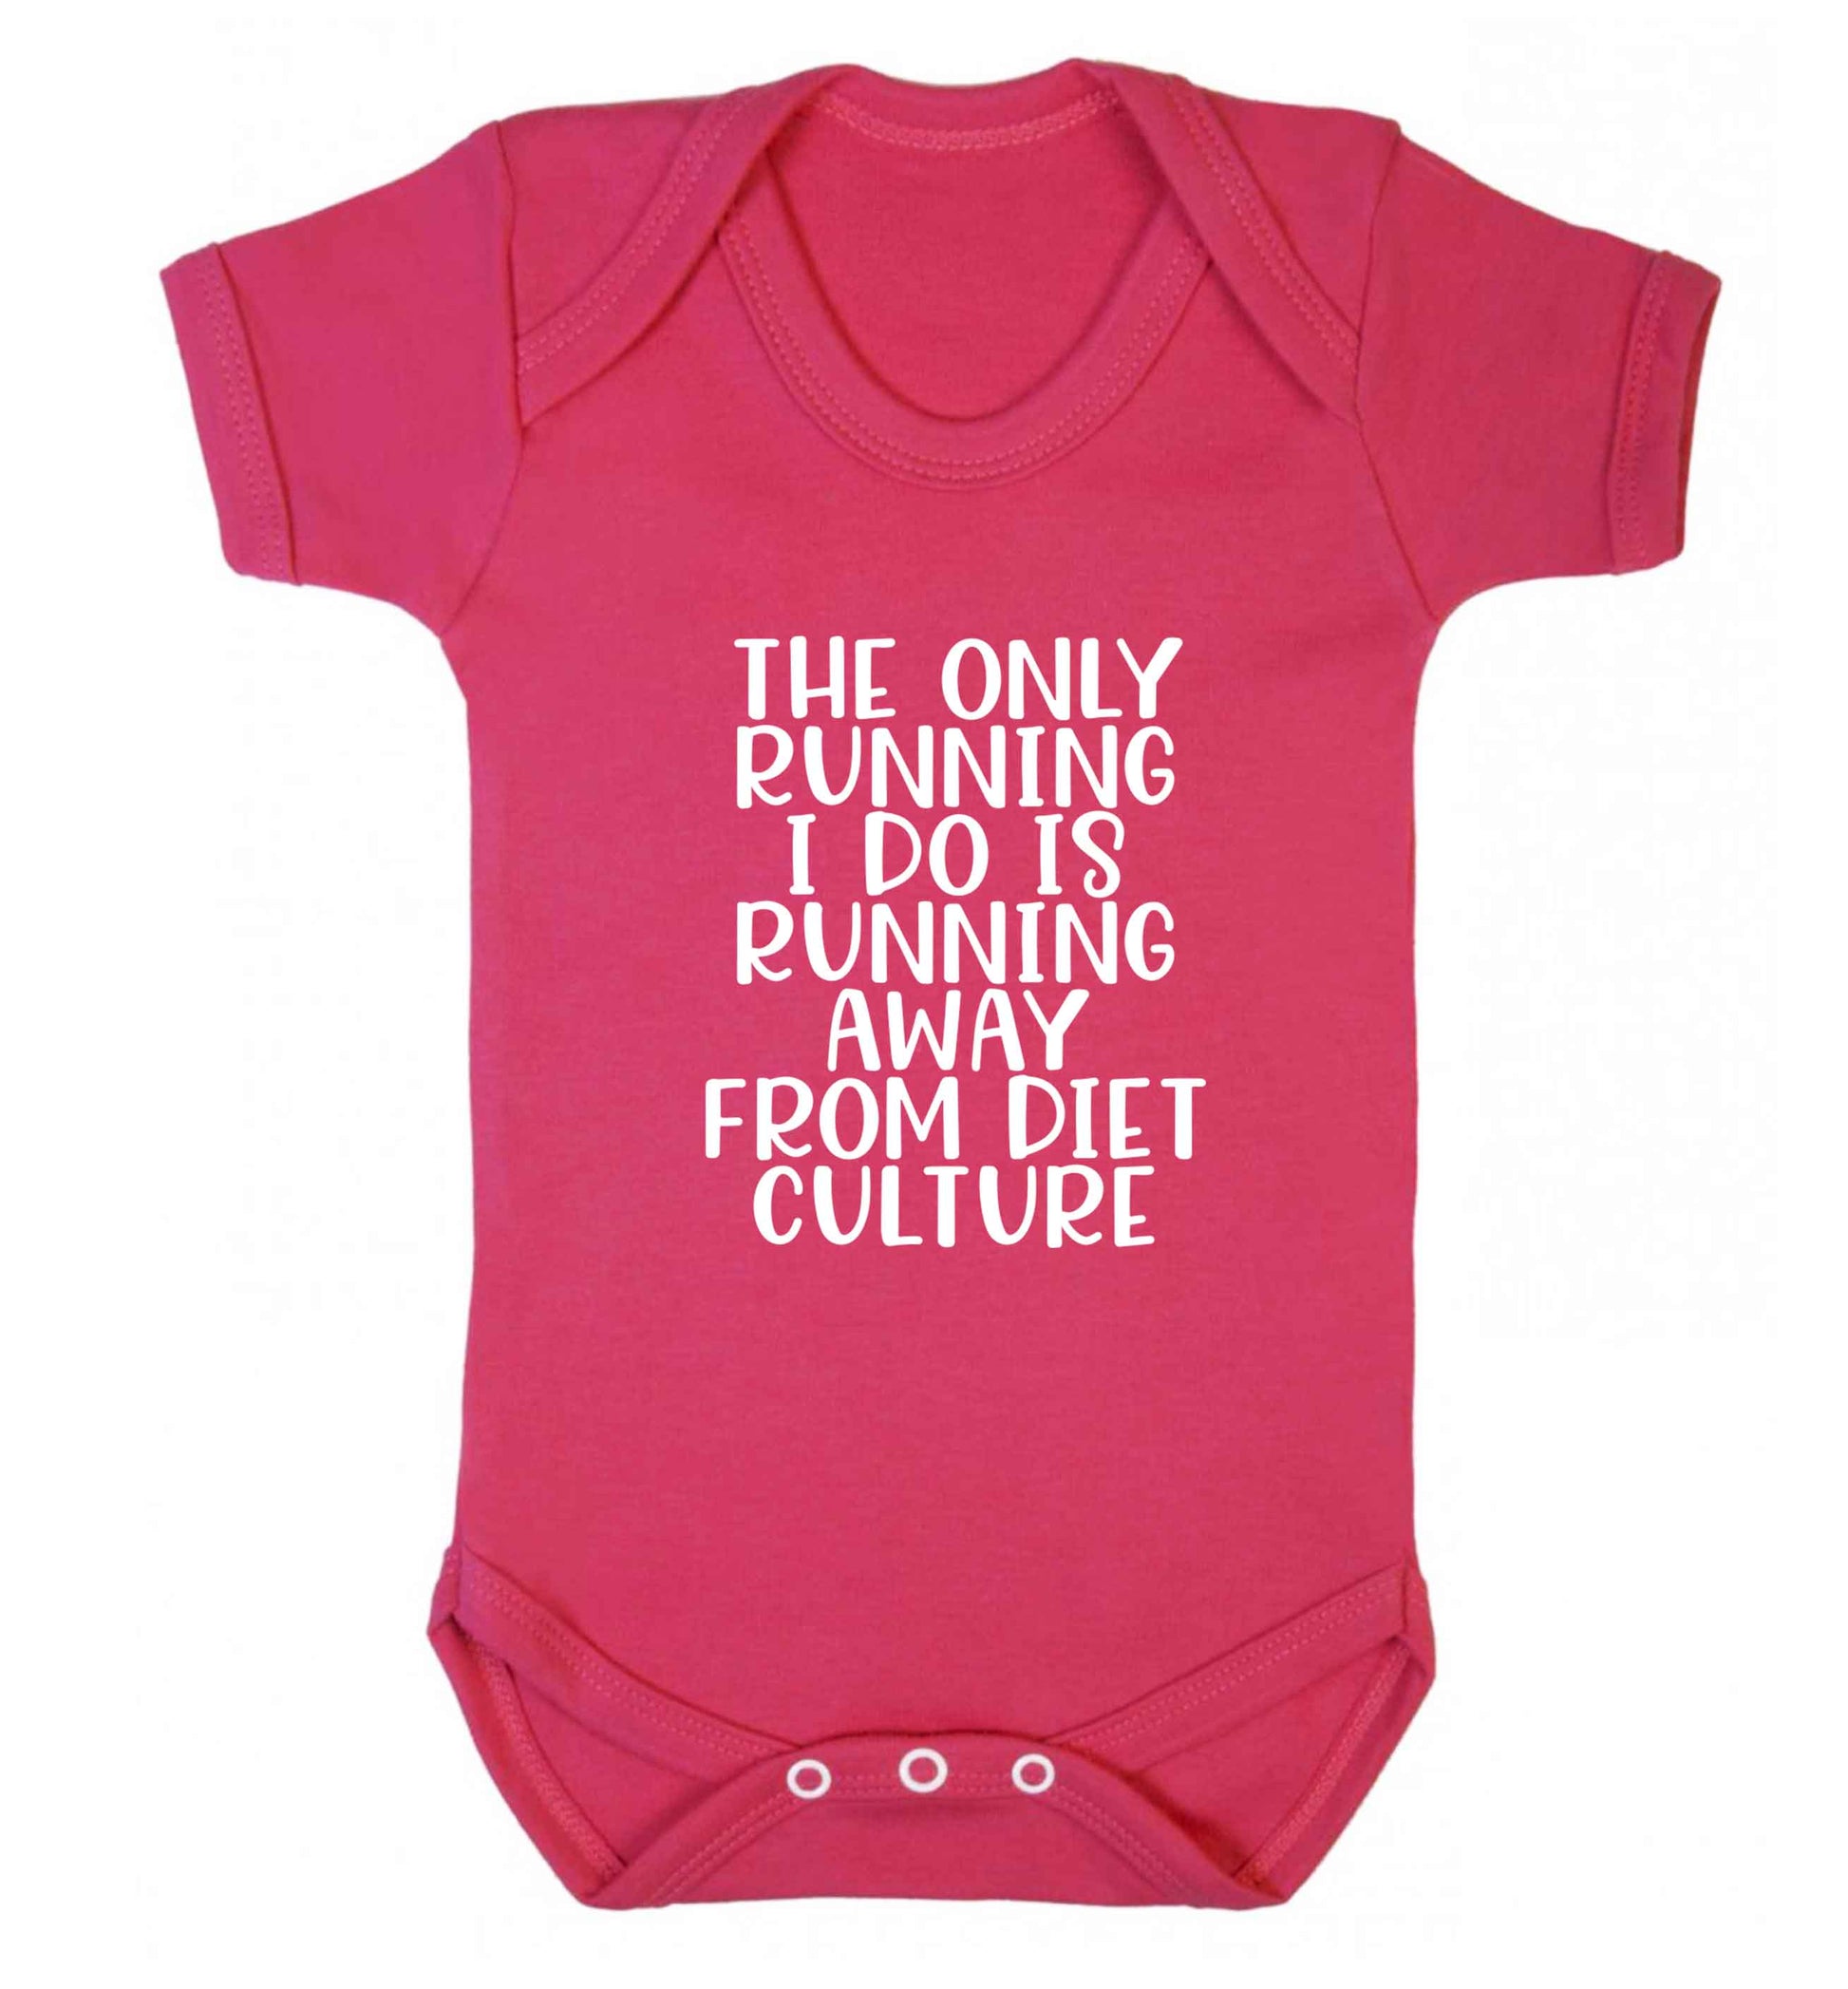 The only running I do is running away from diet culture baby vest dark pink 18-24 months